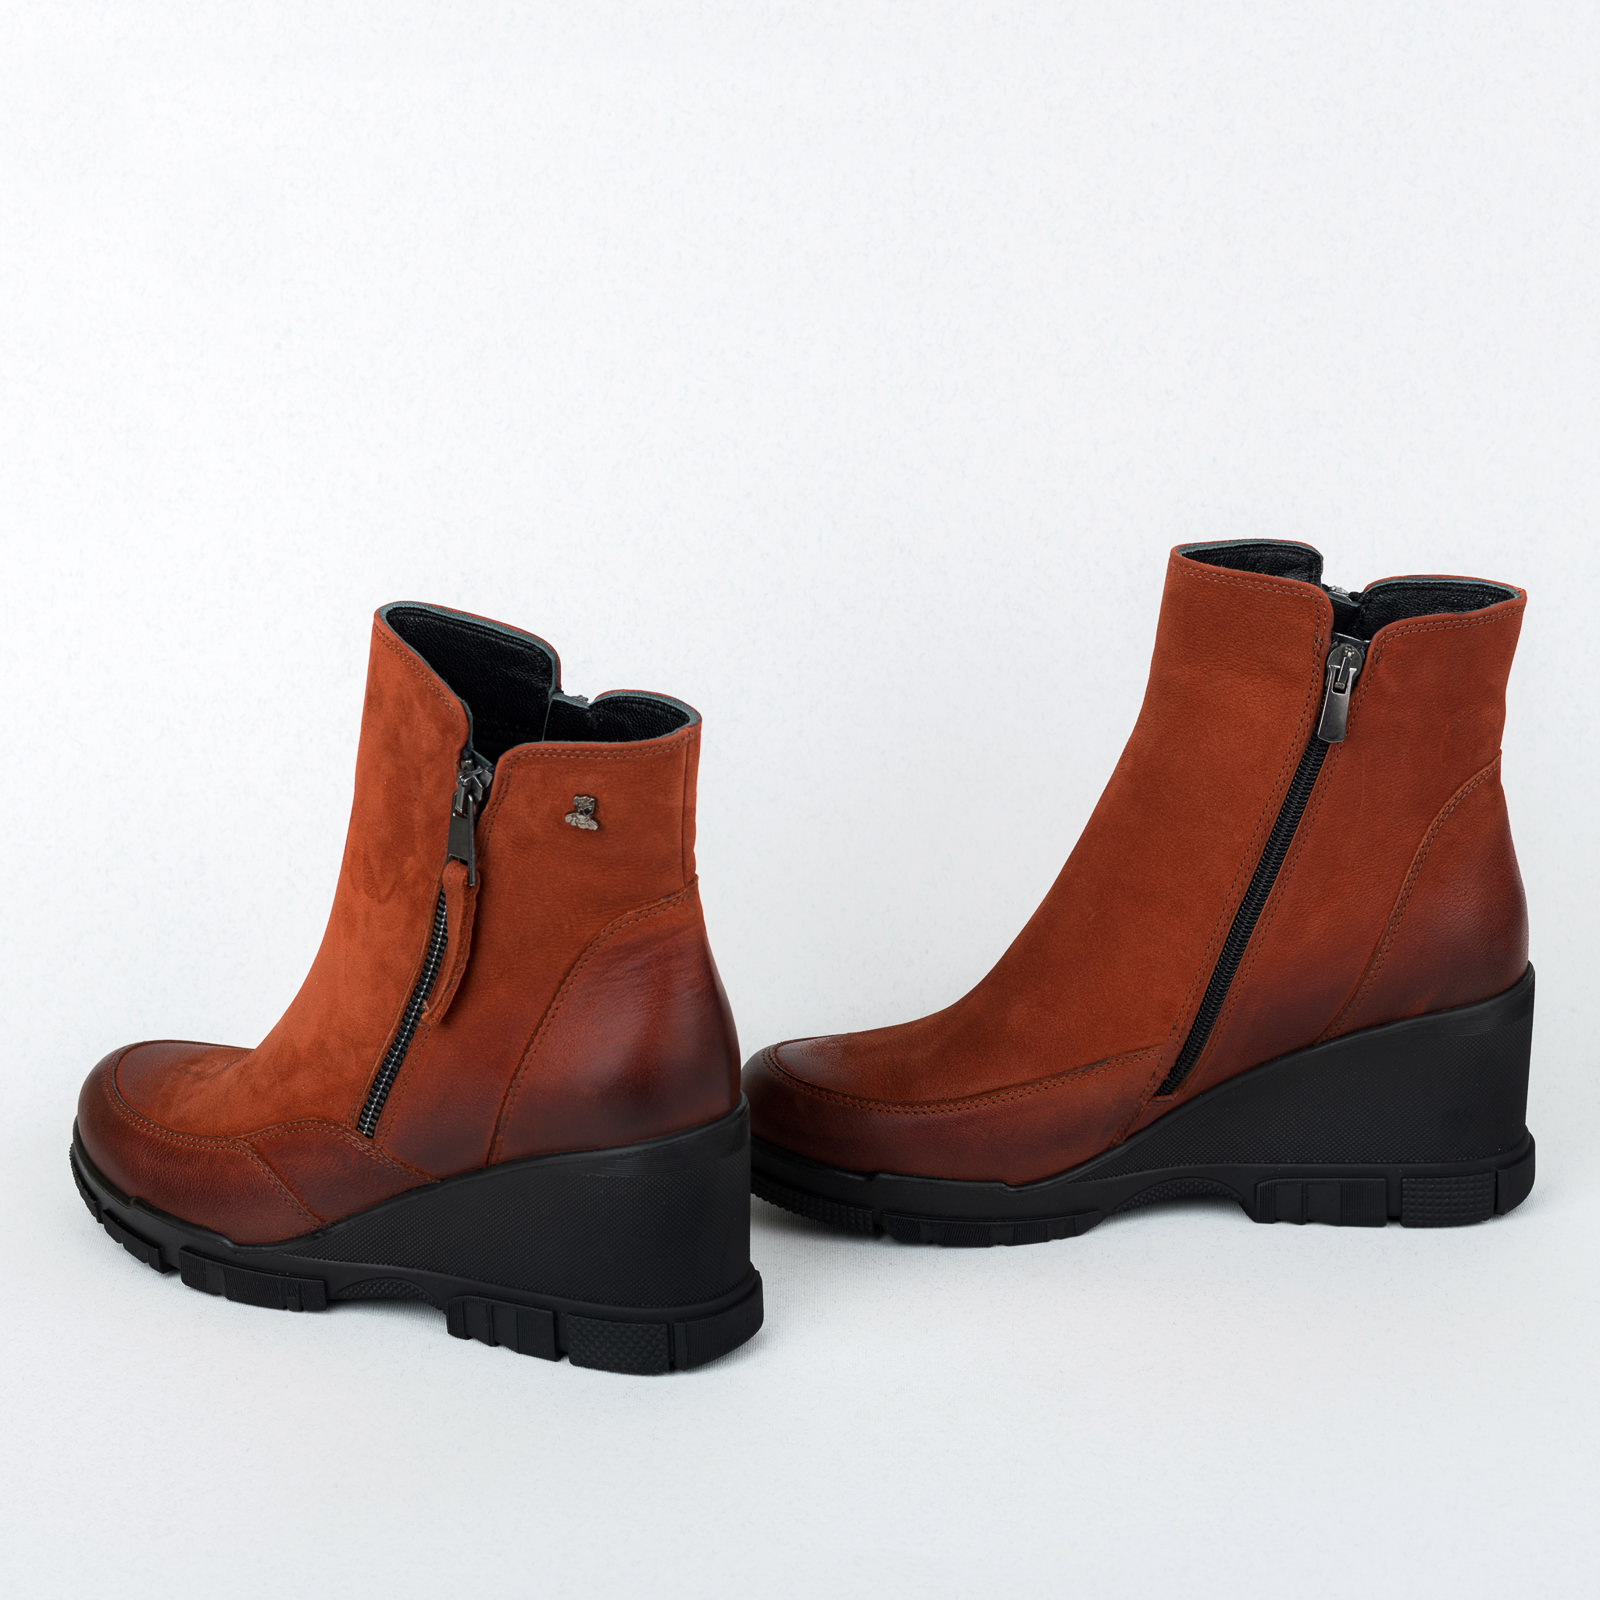 Leather ankle boots B350 - ORANGE